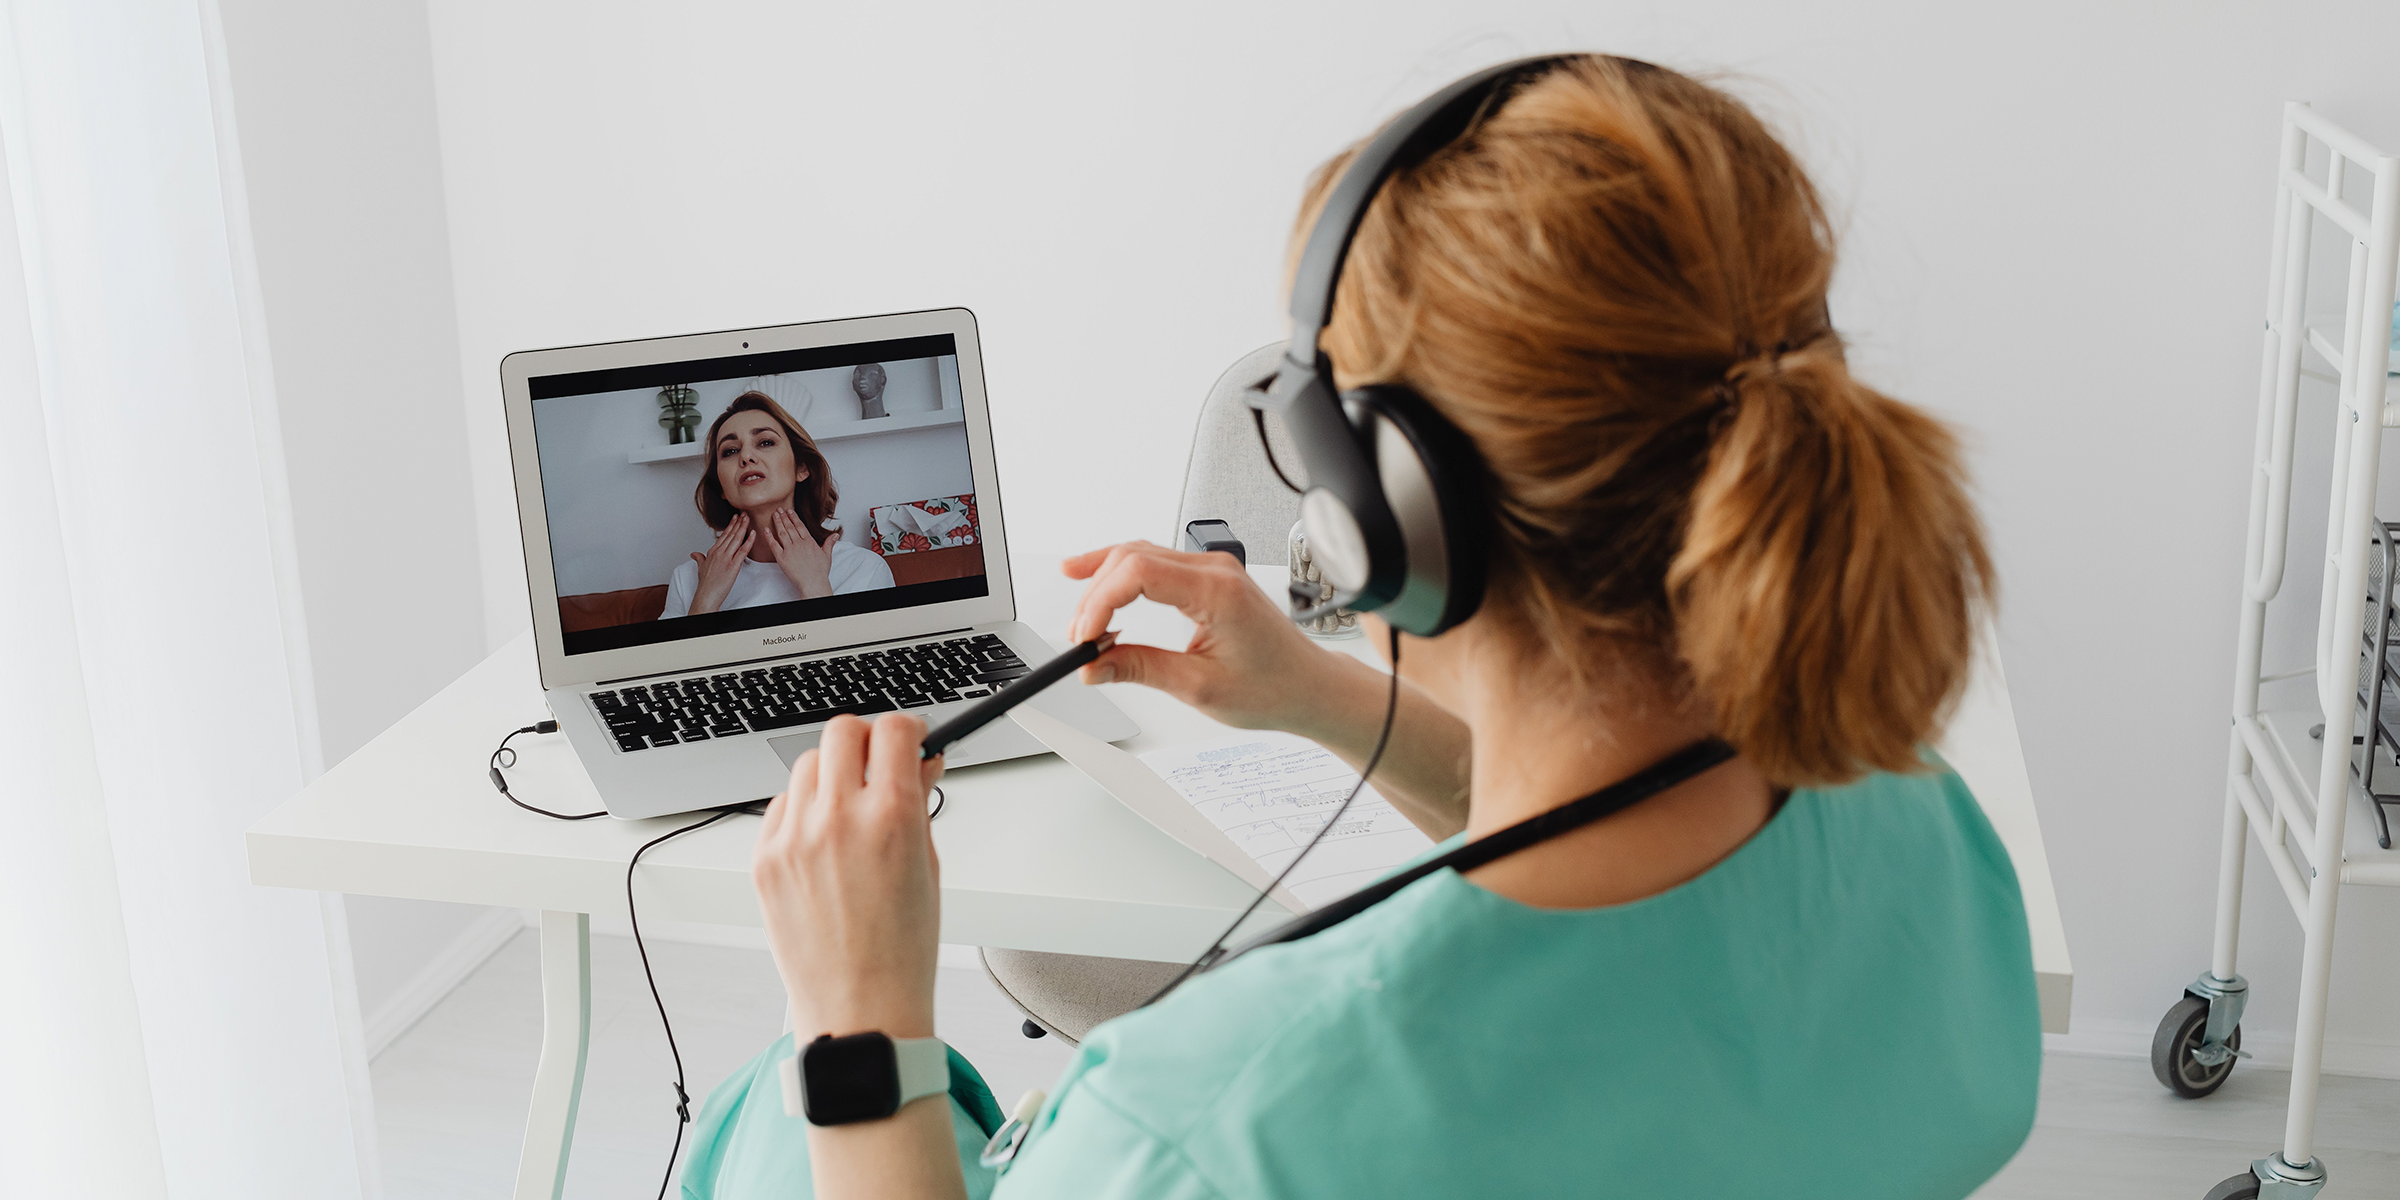 telehealth building trust with patients